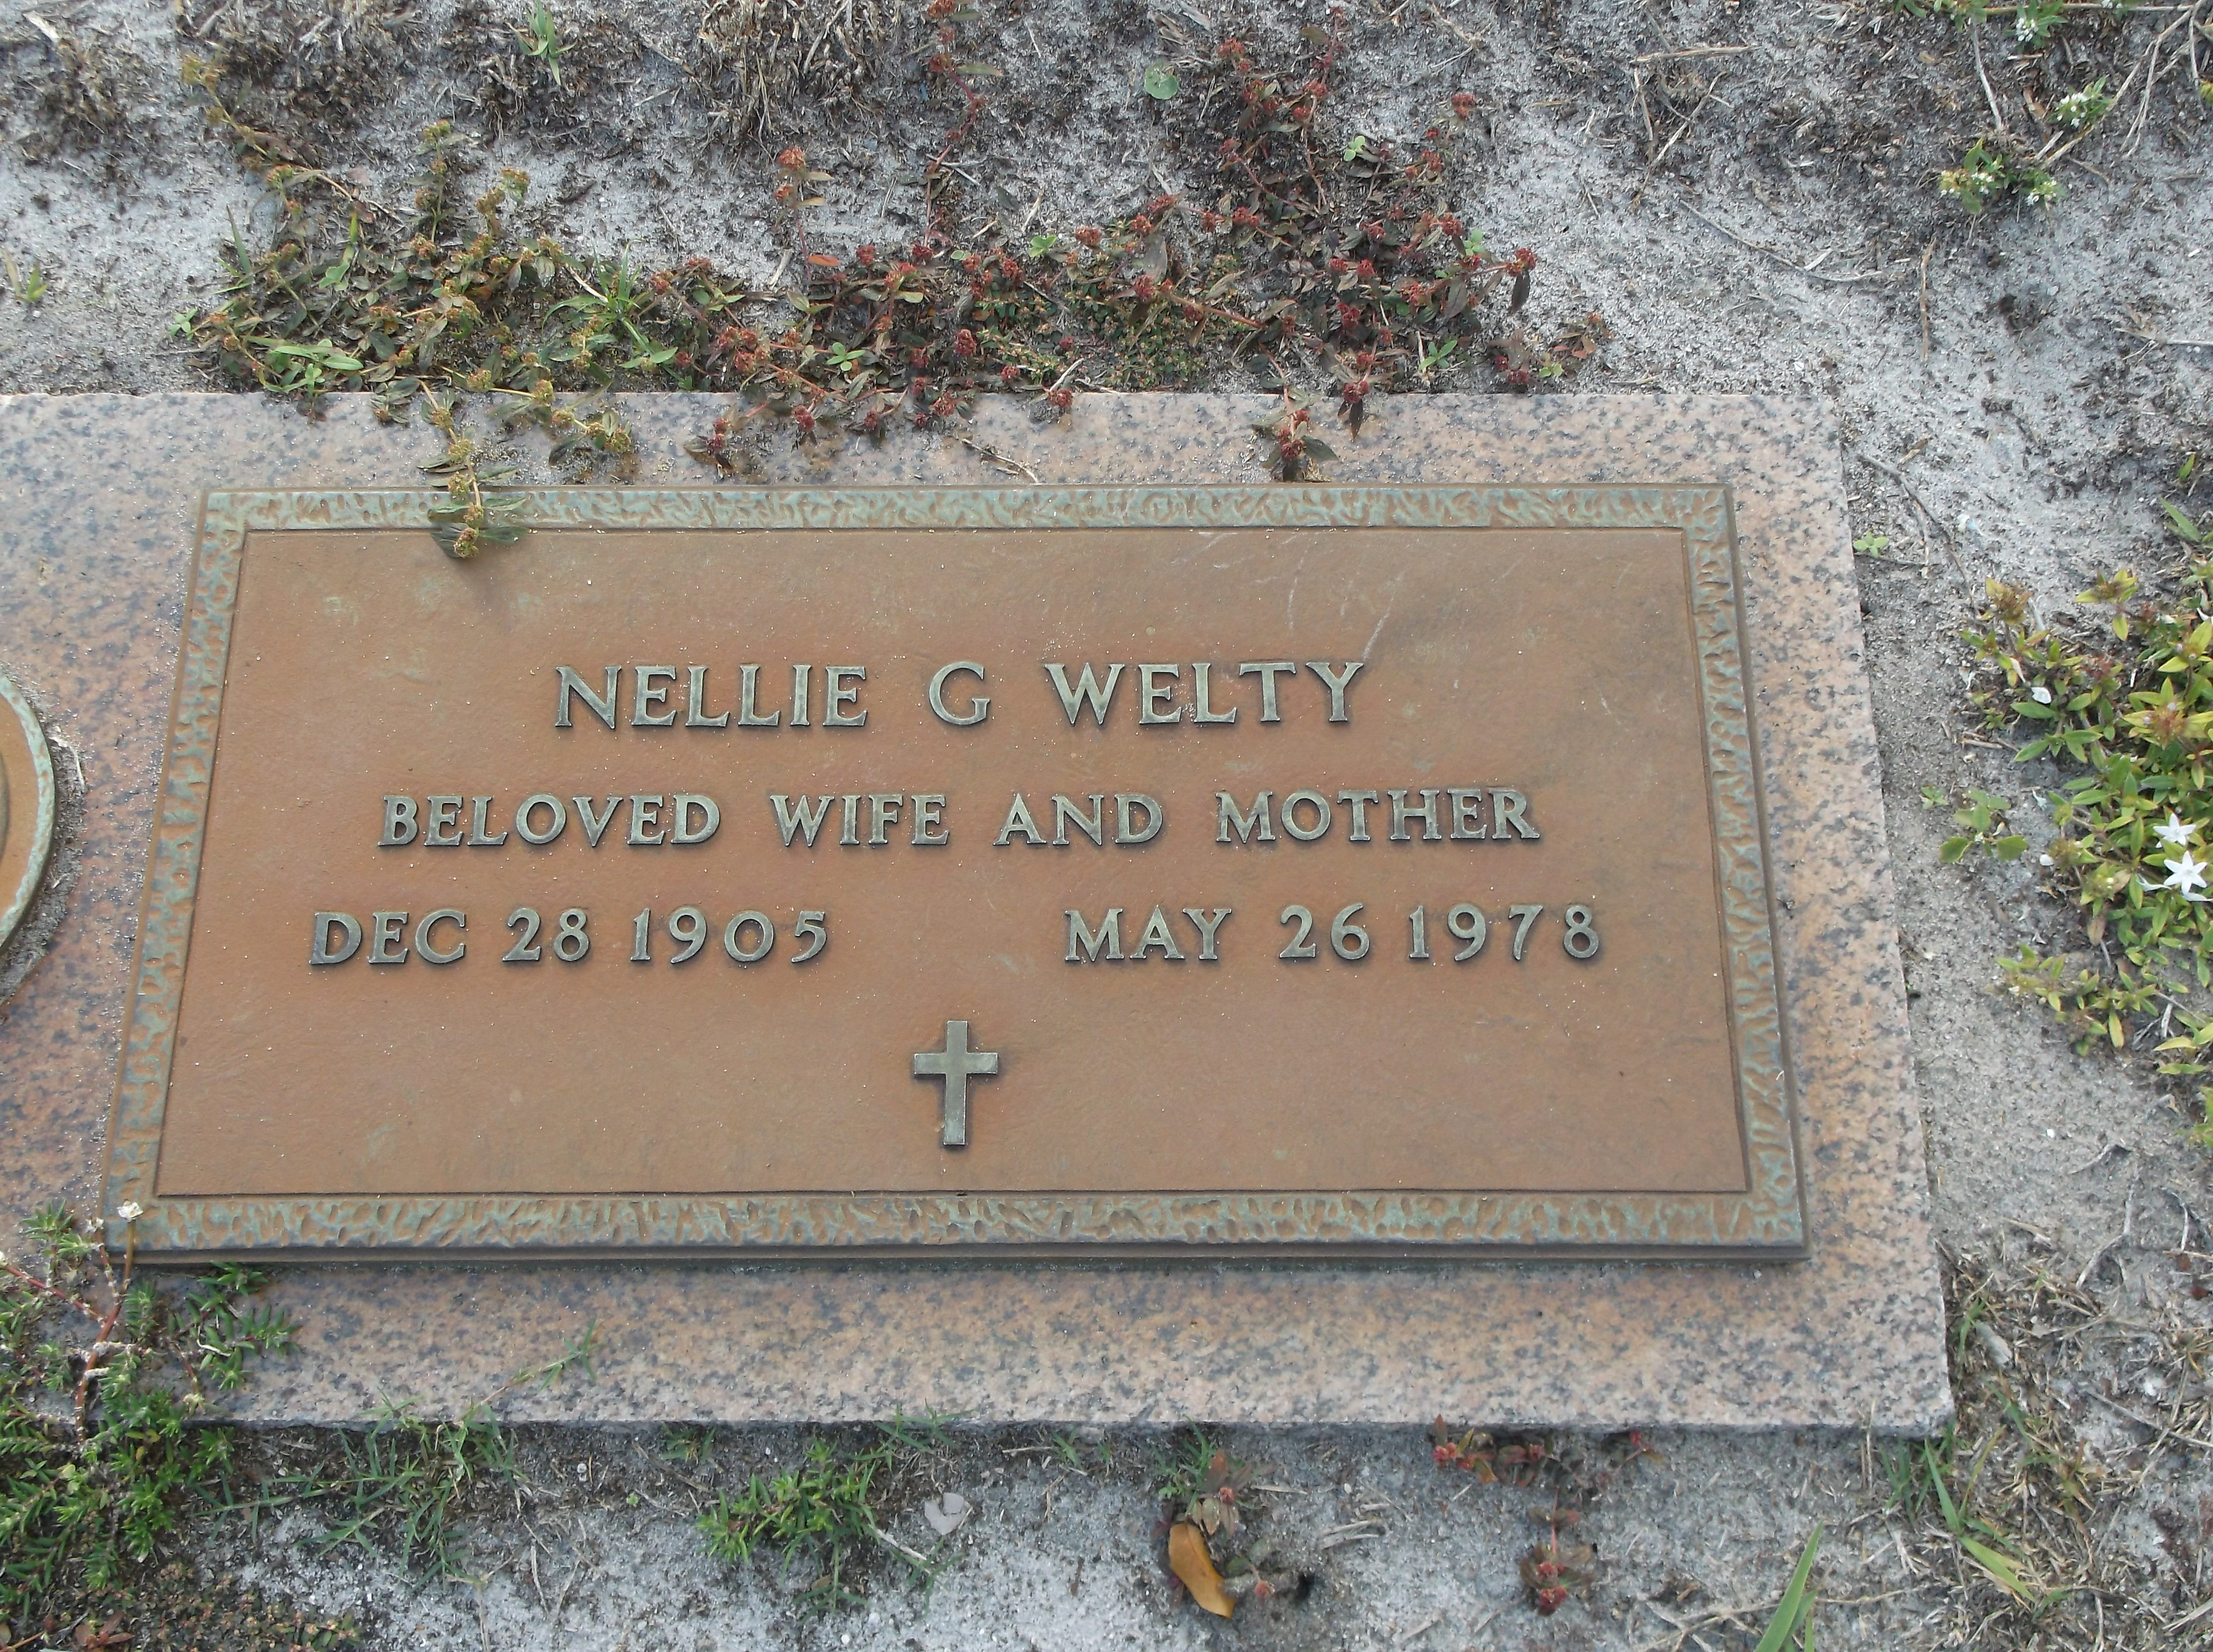 Nellie G Welty